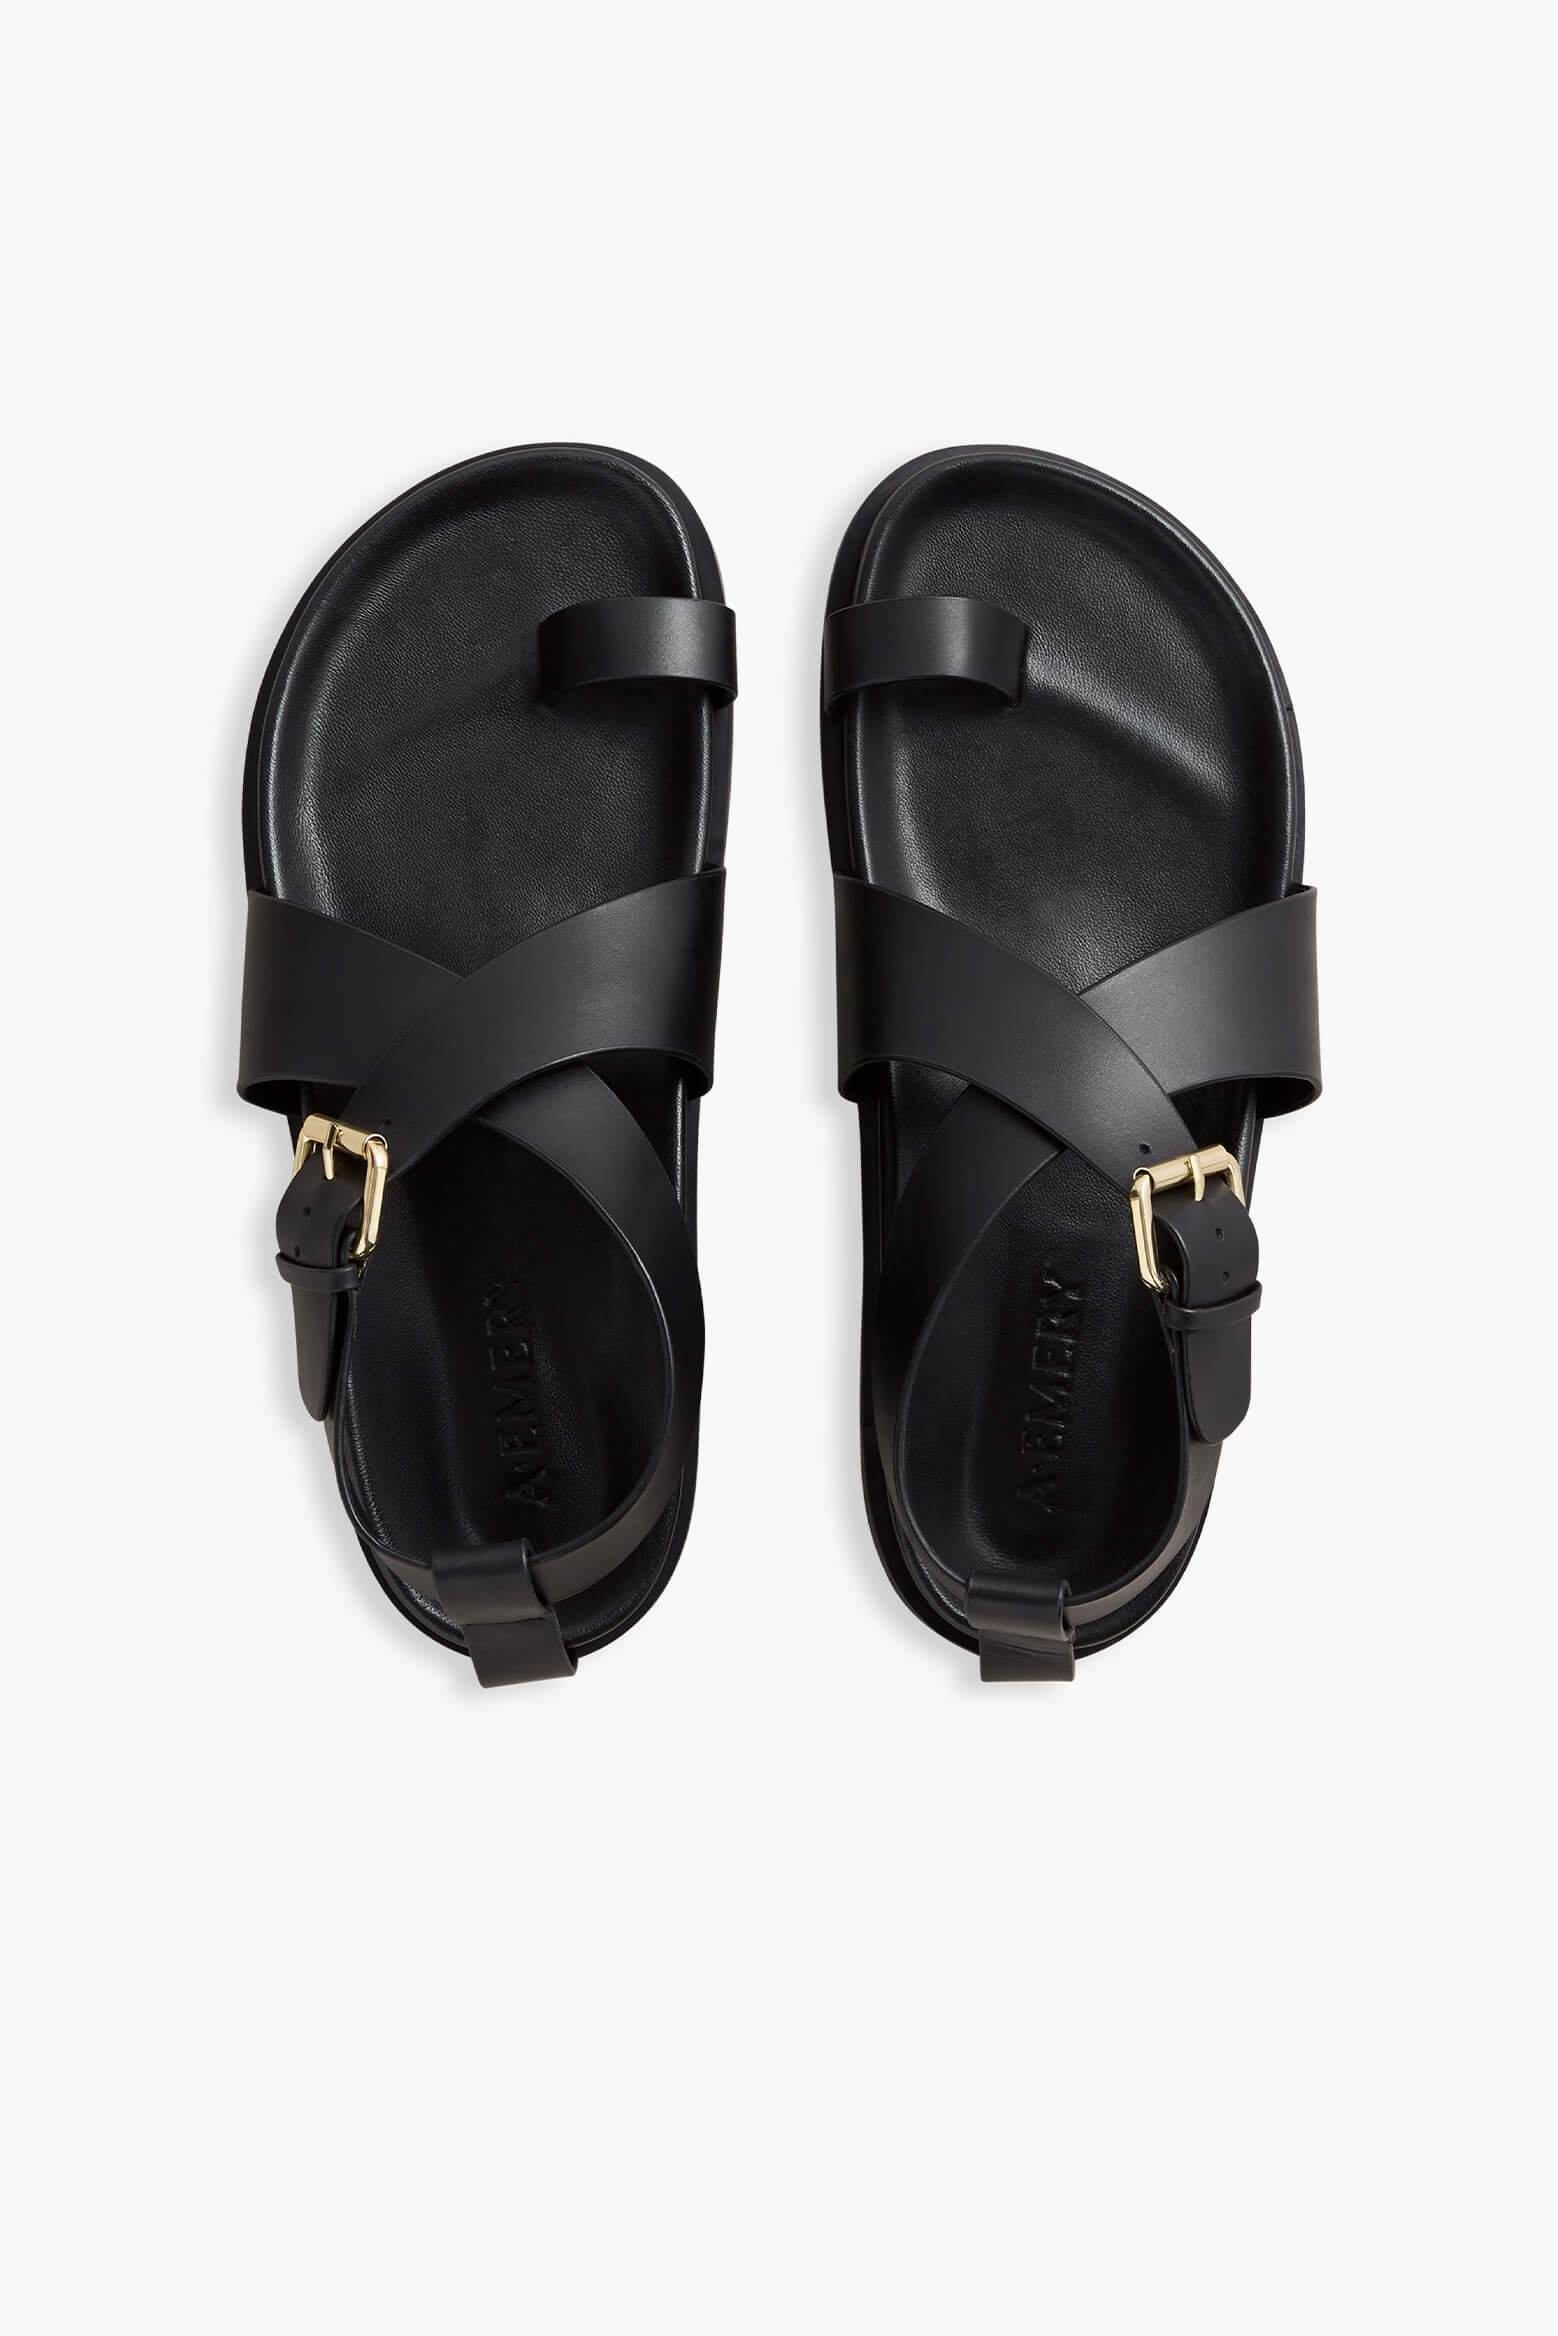 A.Emery Dula Sandal in Black available at The New Trend Australia.